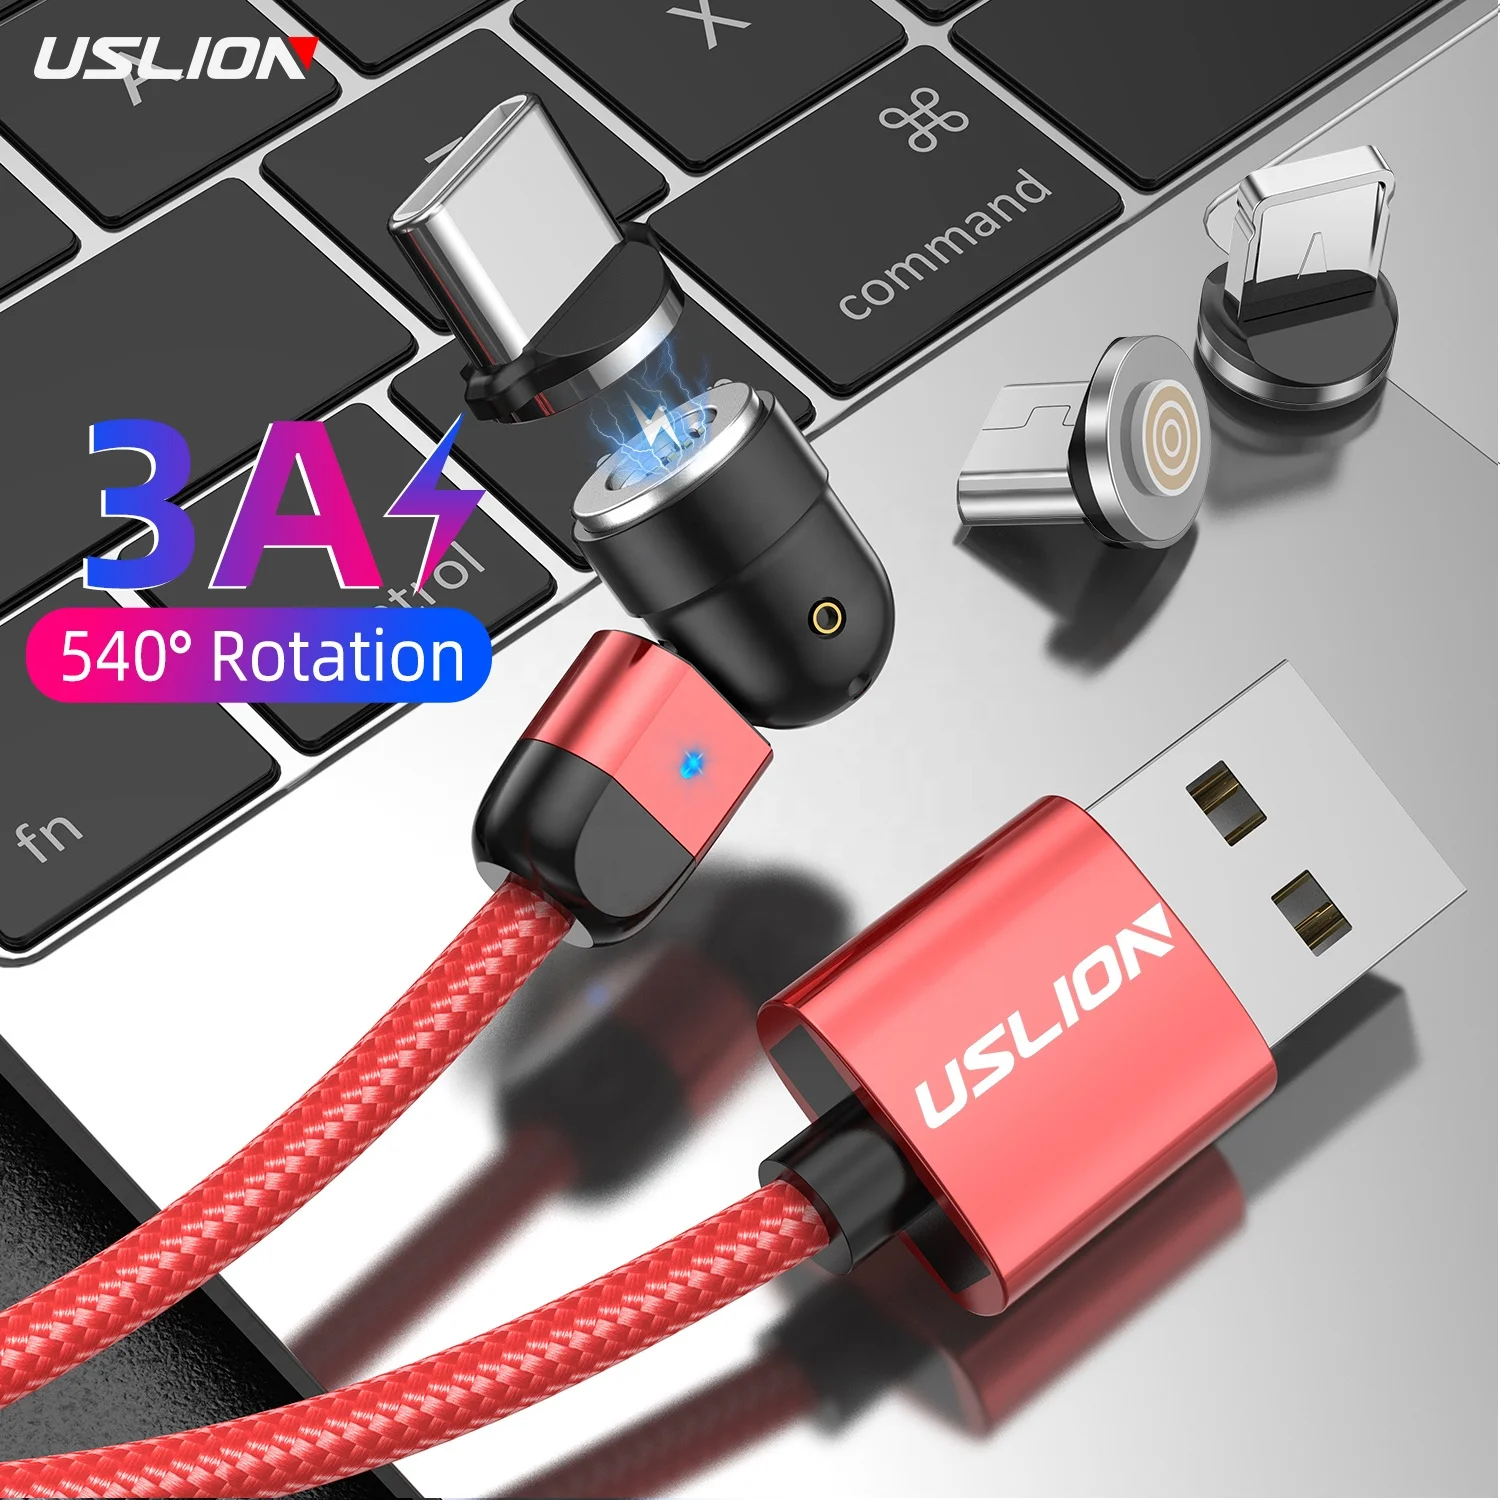 

USLION Amazon Top Seller 2022 L-Shape 180 Bending 540 degree rotation magnetic charging cable 3 in 1 Magnetic USB Cable FOR iQOO, Black red purple silver